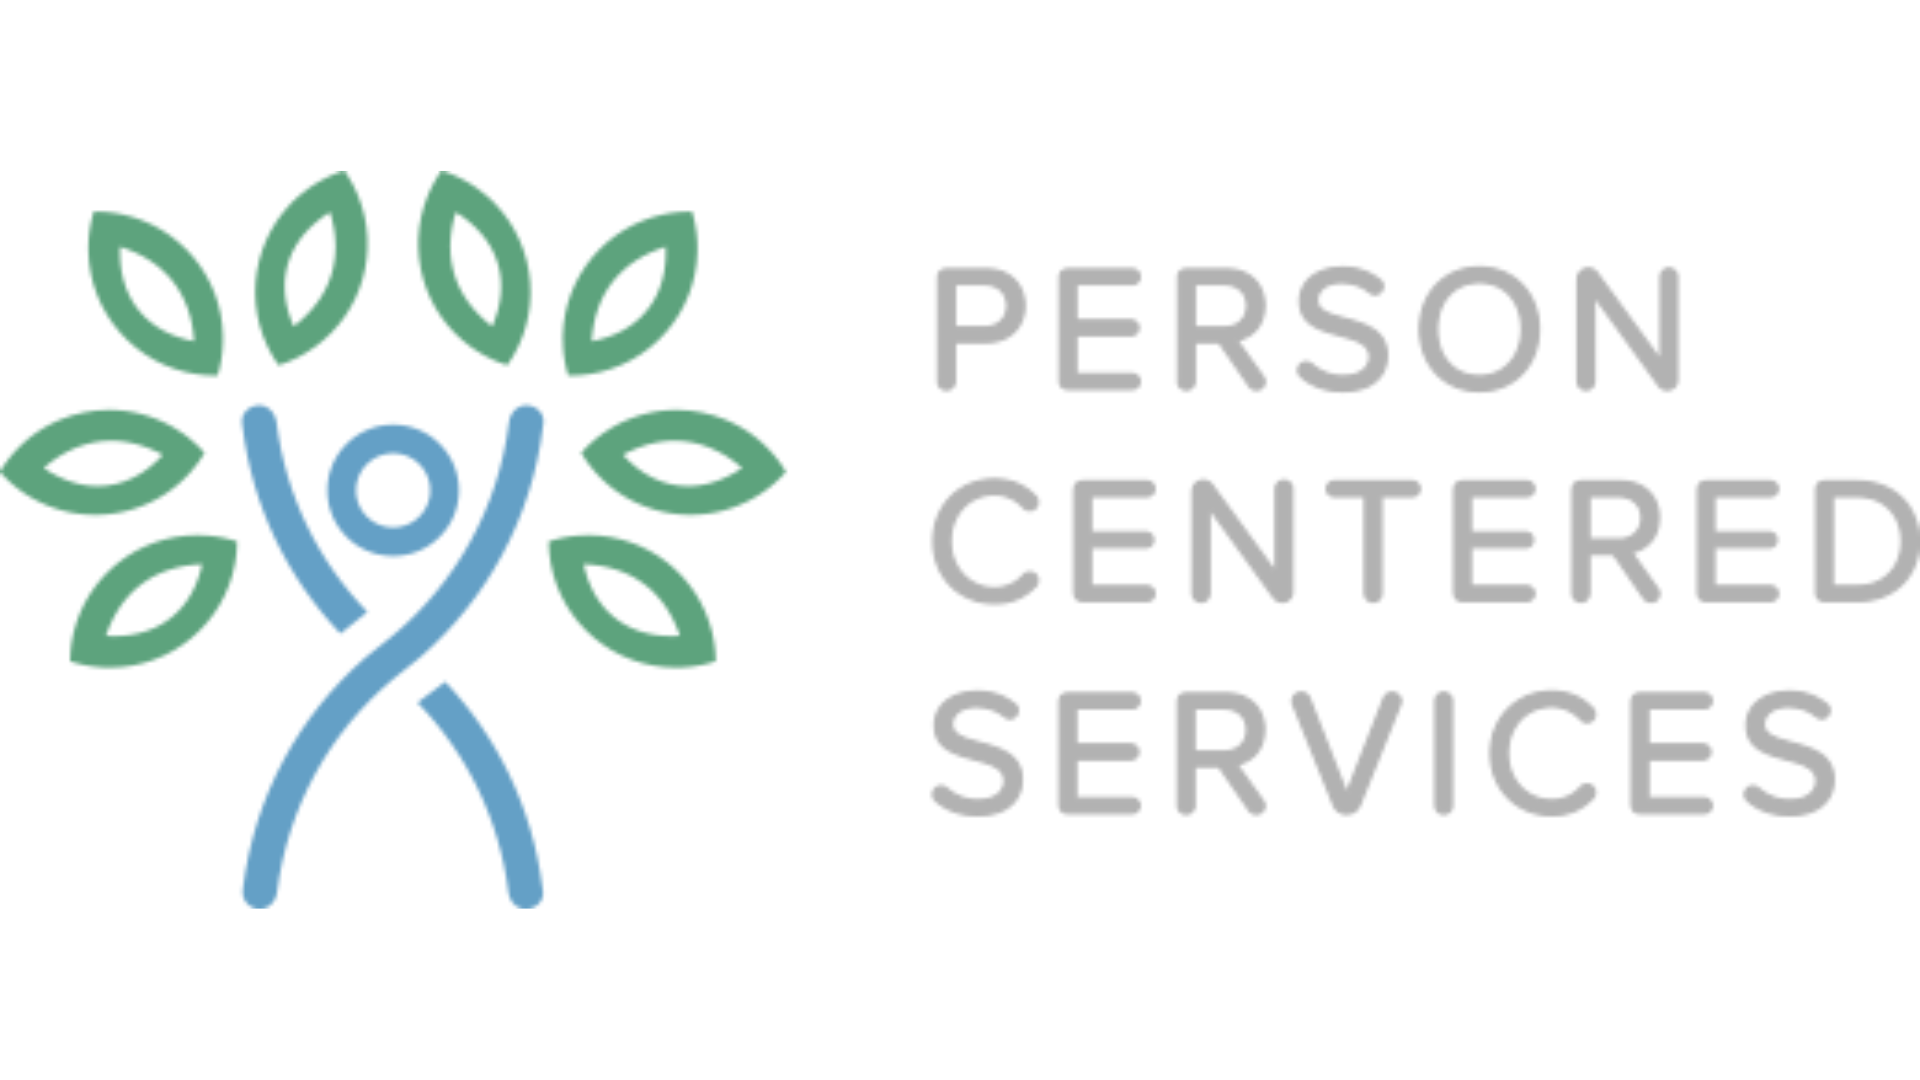 Person Centered Services logo and link